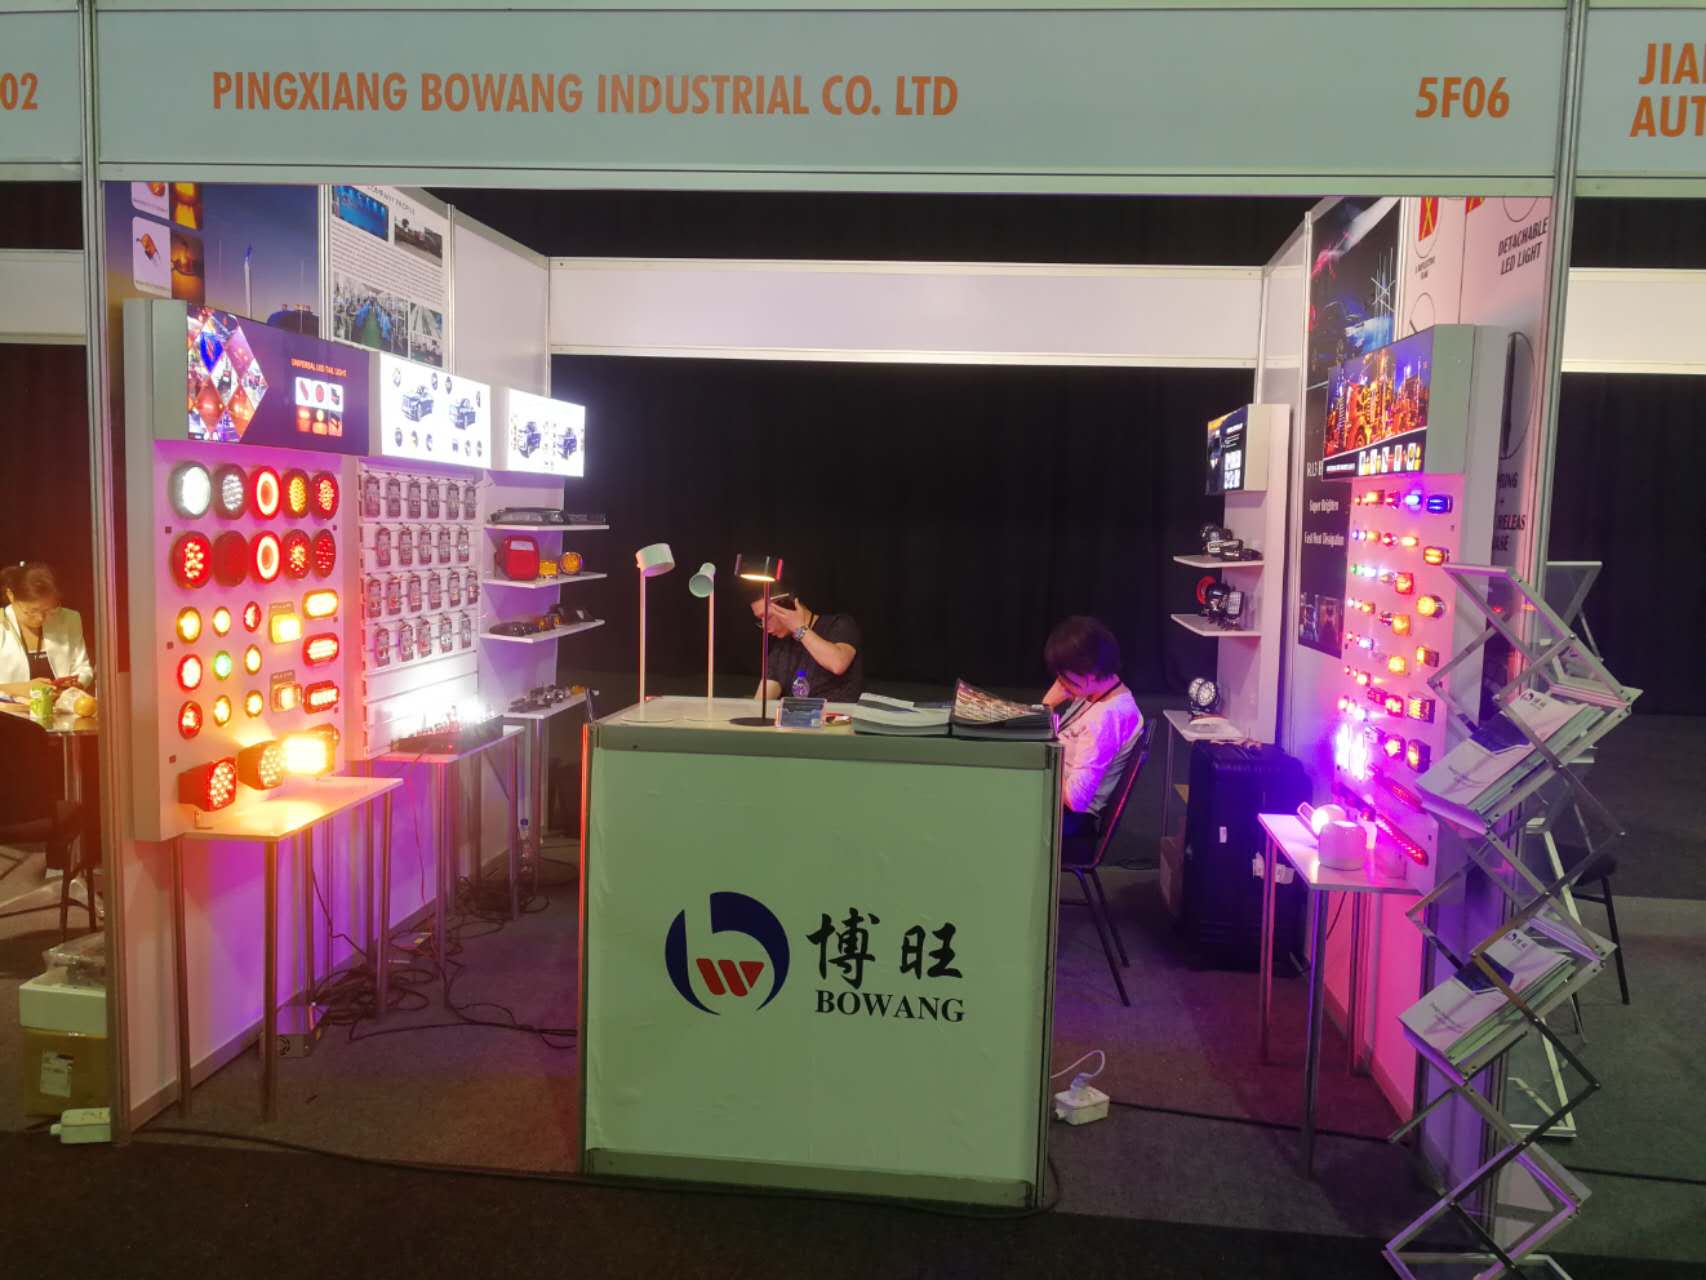 Congratulations on the successful conclusion of the Dongguan Bowang of Automechanika Johannesburg Car Show 